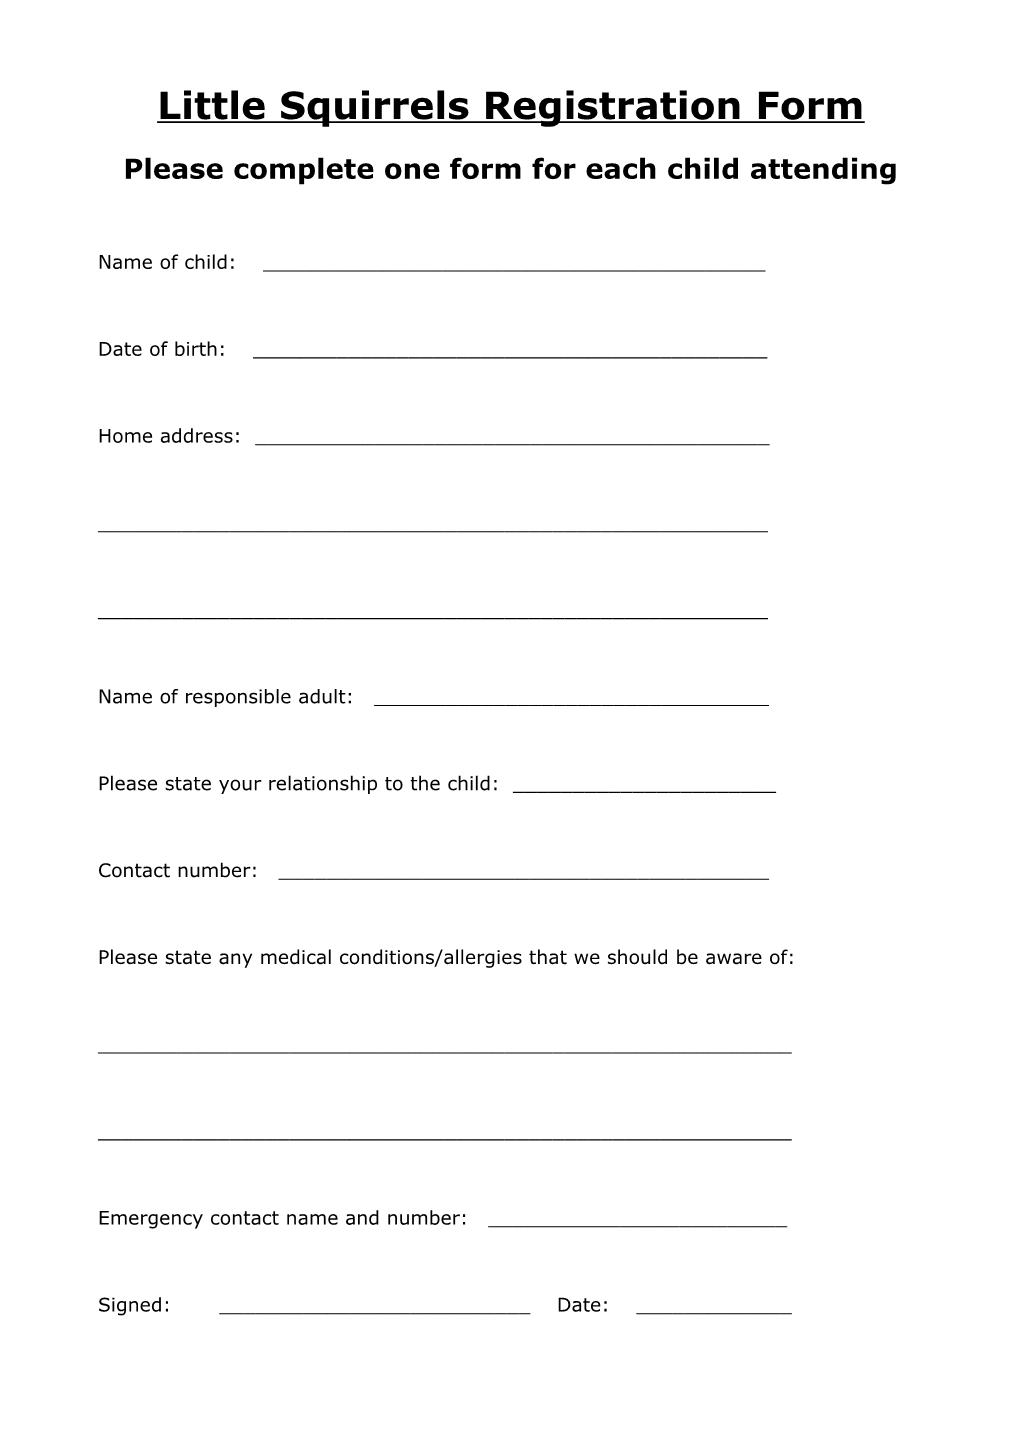 Please Complete One Form for Each Child Attending